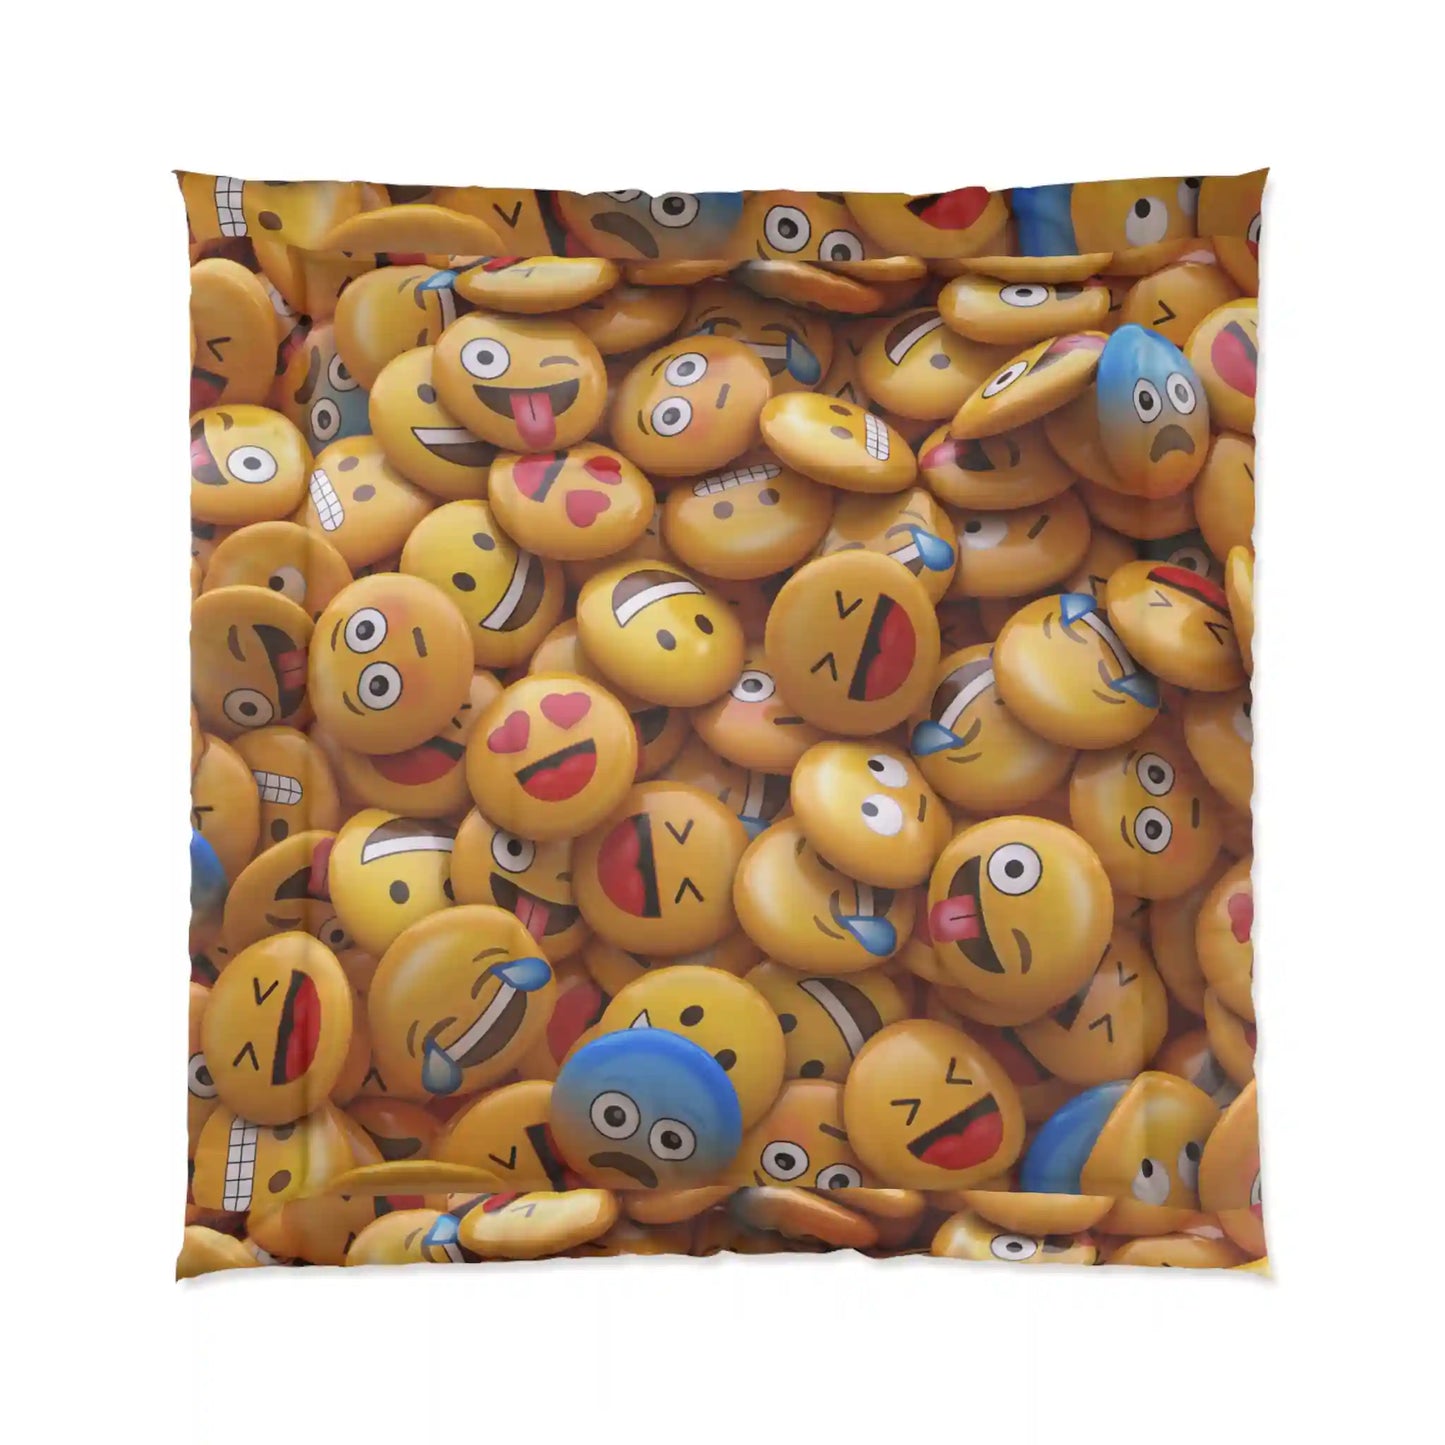 Comforter, quilting, laying, bed quilt (Emoji)